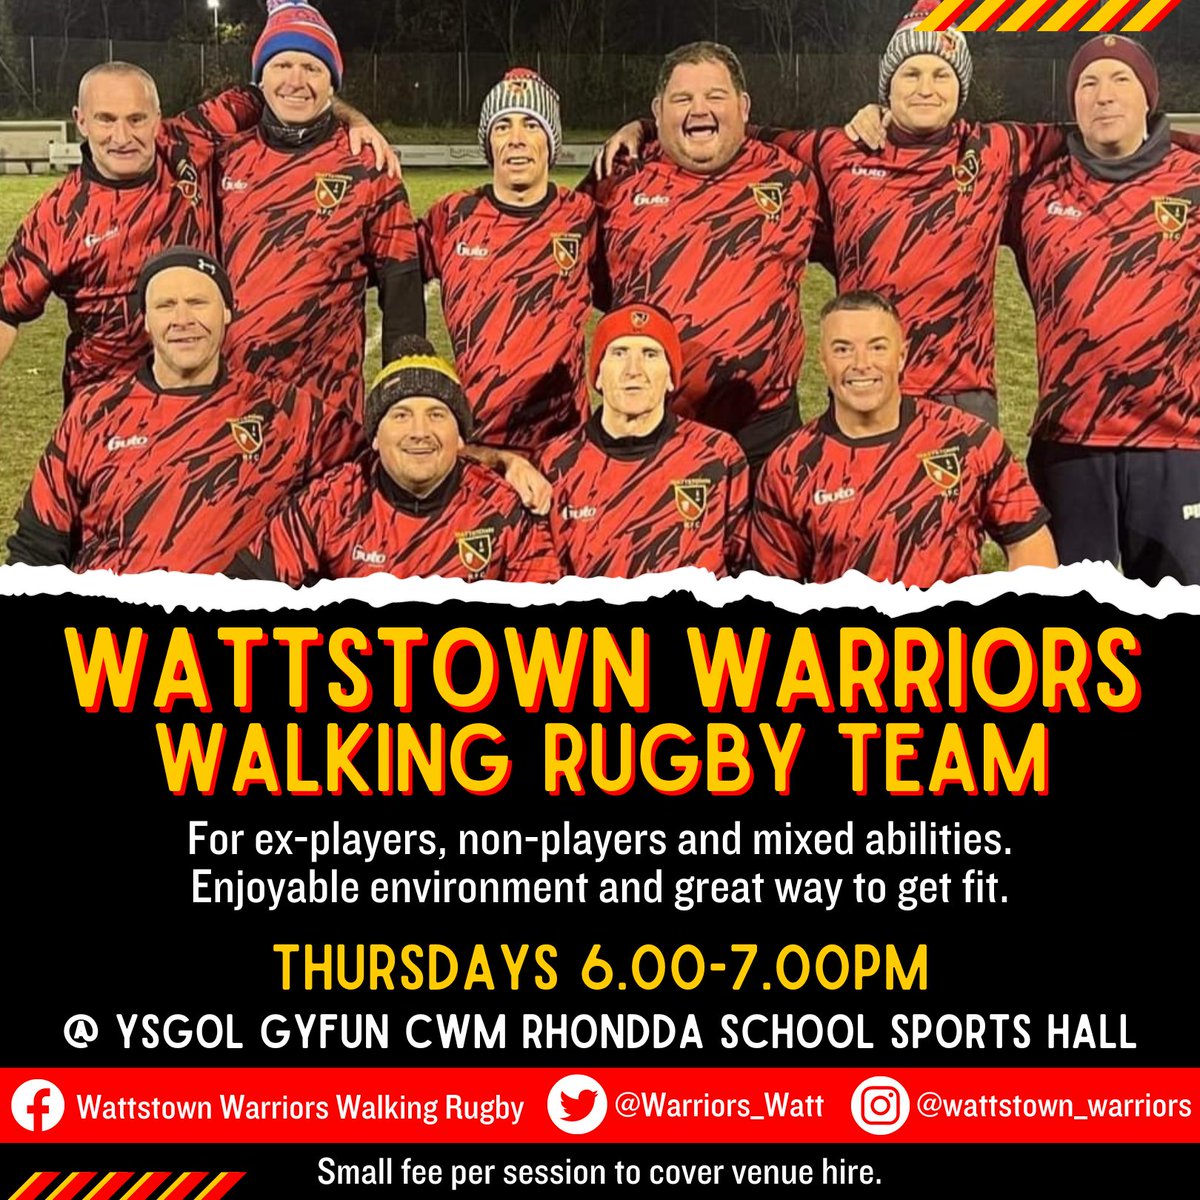 Looking to try Walking Rugby? Live in the Rhondda? Cambrian Village Trust, Play It Again Sport & Wattstown Warriors are here to help! 🏉 📍 Clydach Vale - Monday and Thursdays 11:30am 📍 Treherbert - Thursdays 2:00pm 📍 Porth - Thursdays 6:00pm Full details on the flyers!